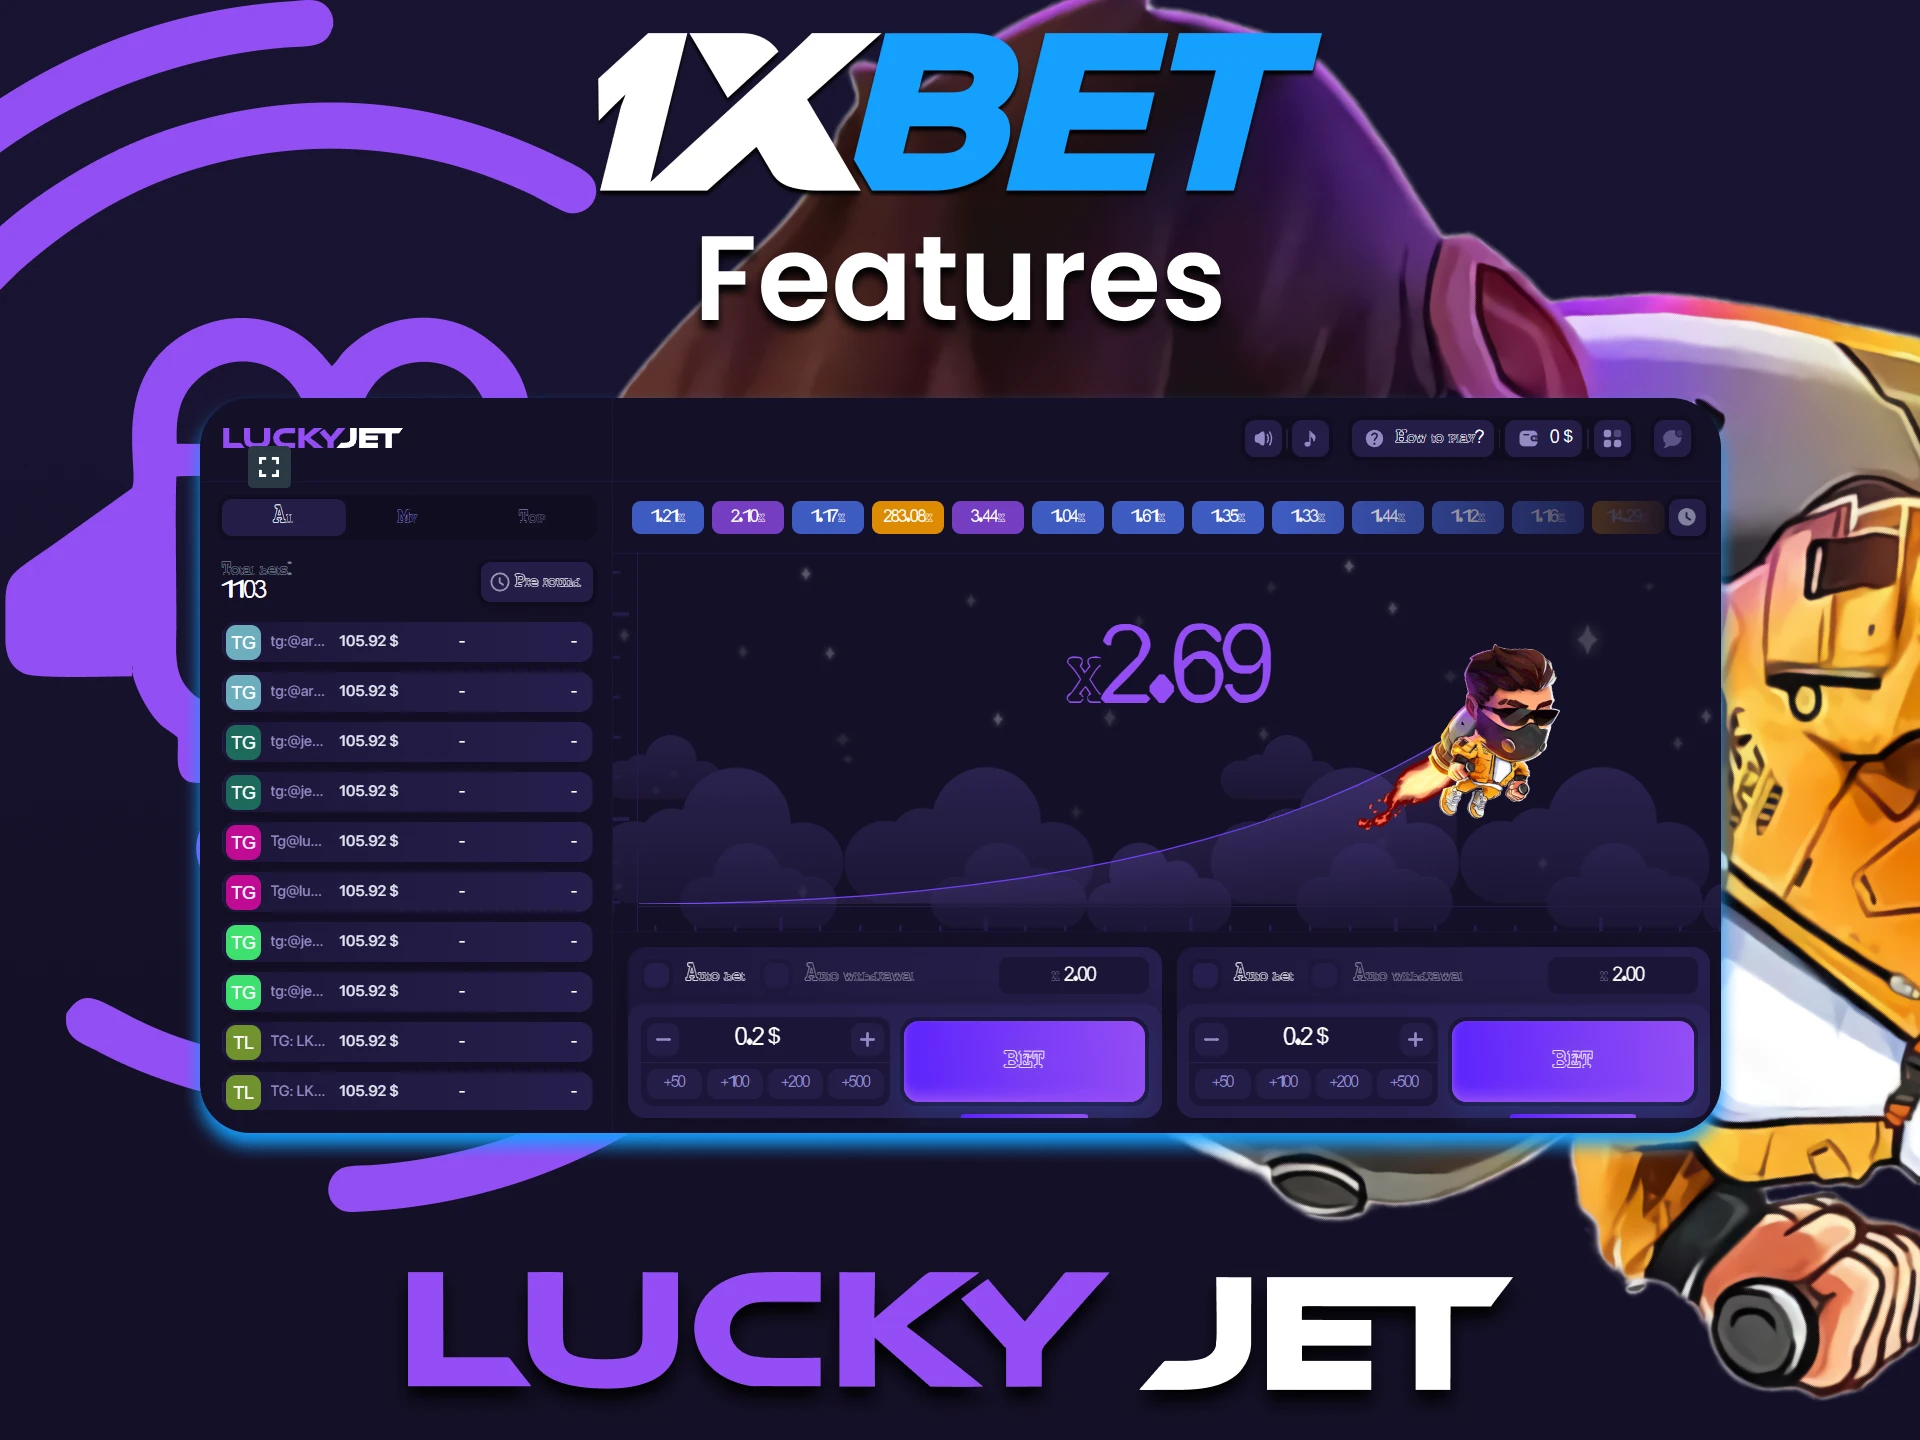 Lucky Jet is waiting for improvements at 1xbet.